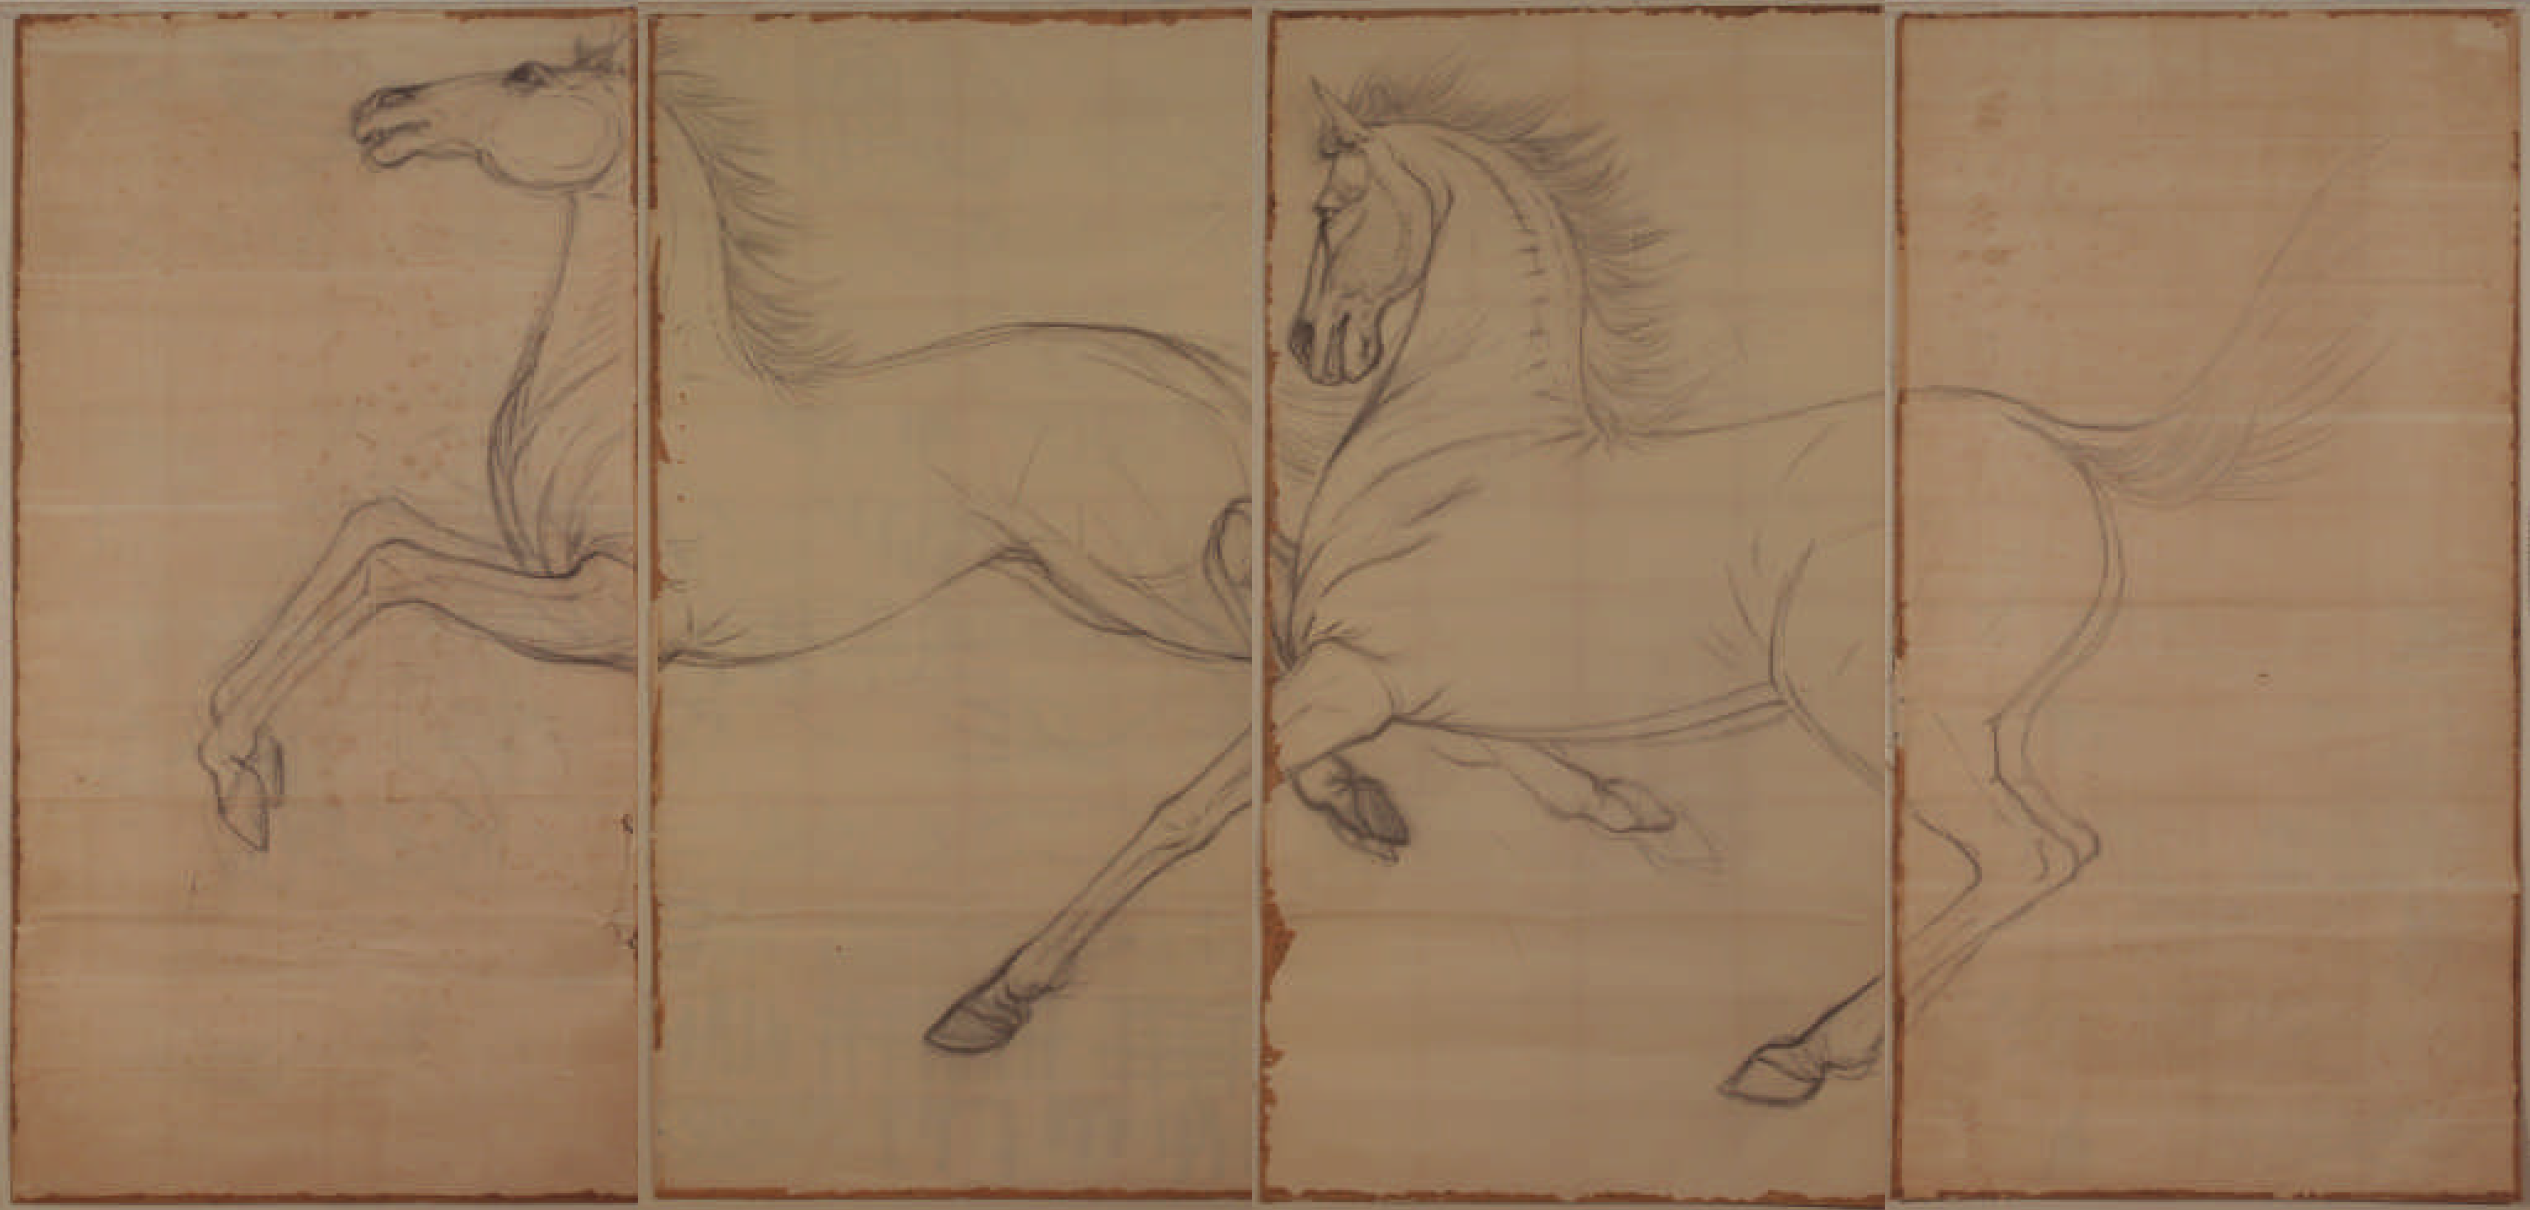 a larger drawing of two horses running side by side, the line work is graphite on tan paper